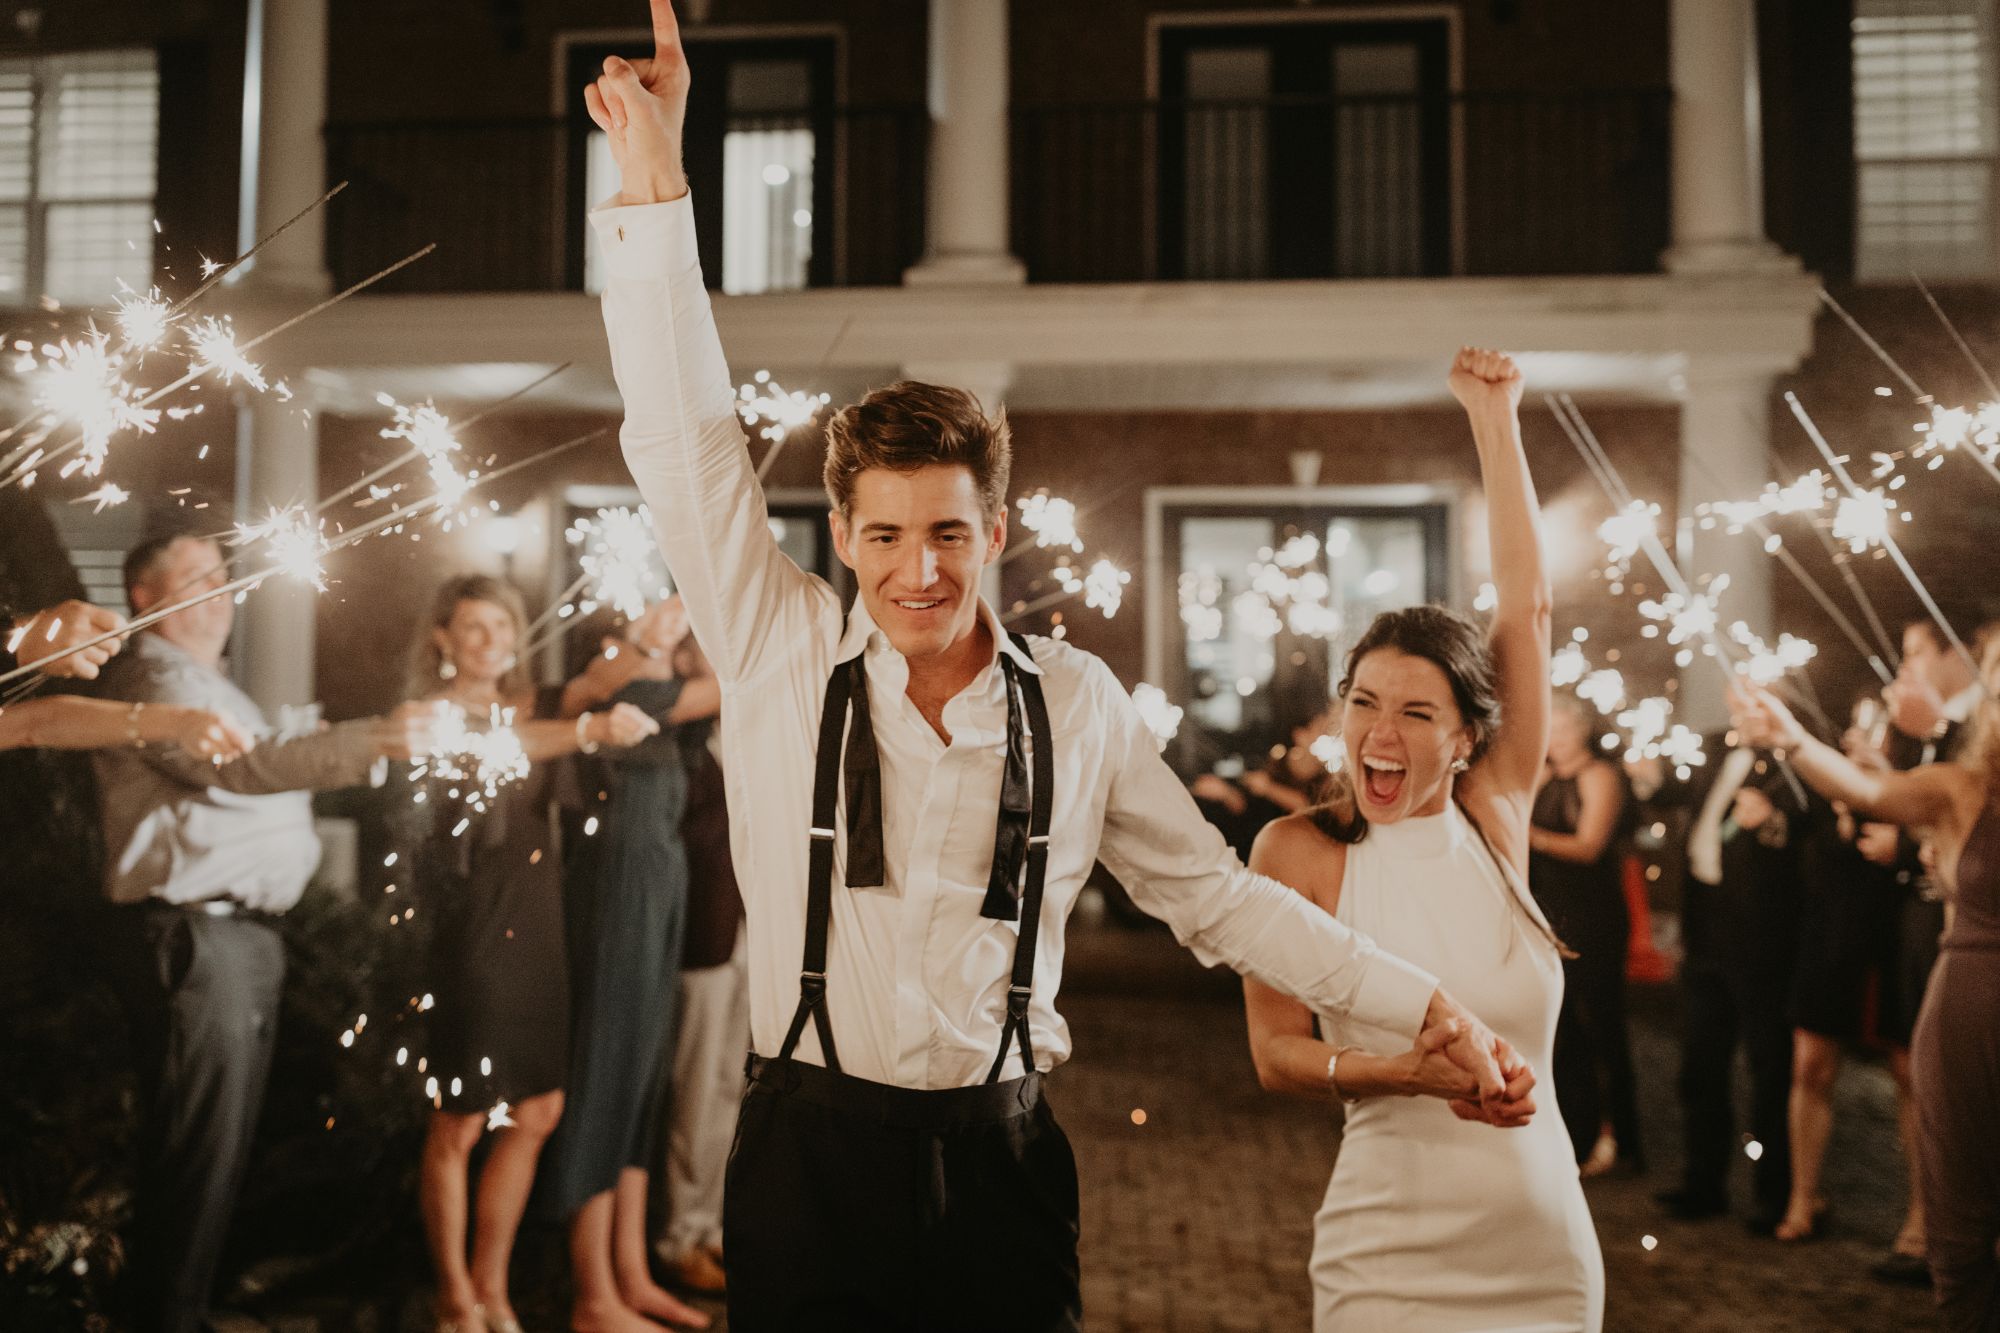 Newlywed couple walking amongst guests holding sparklers.